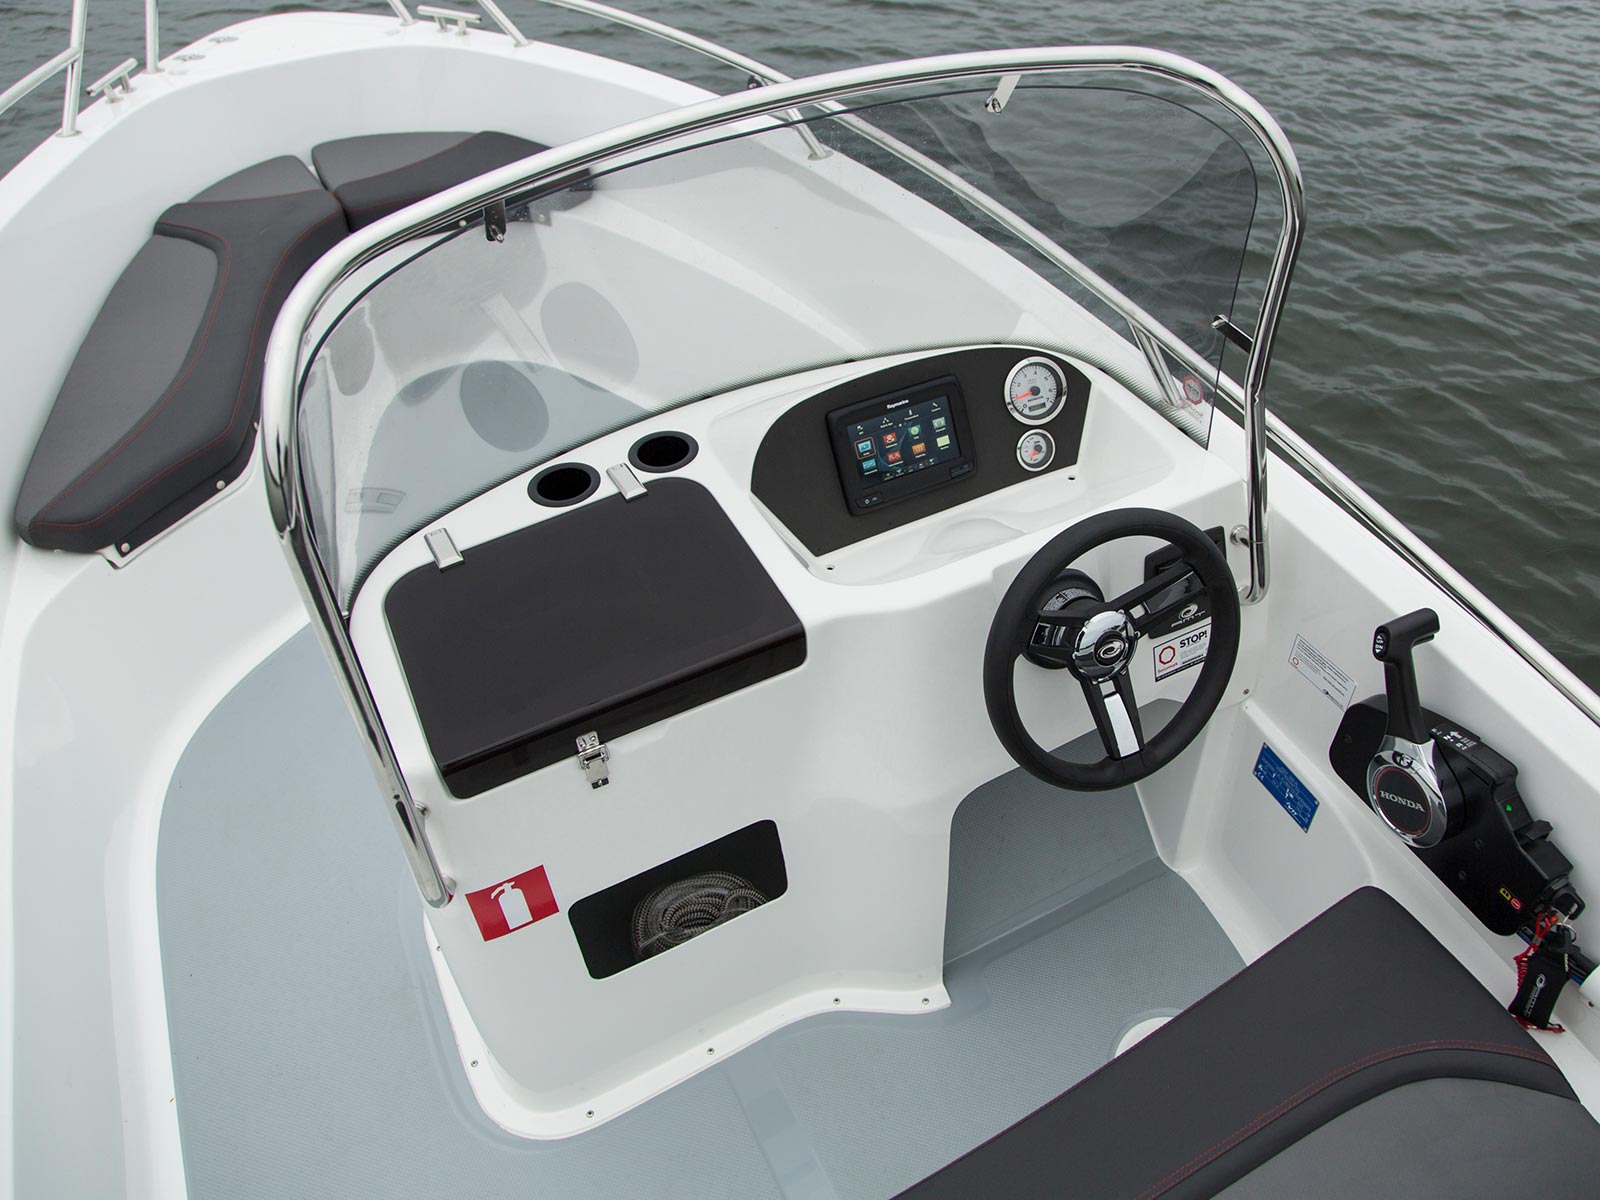 AMT 160 R | Boat Solutions, Utting am Ammersee